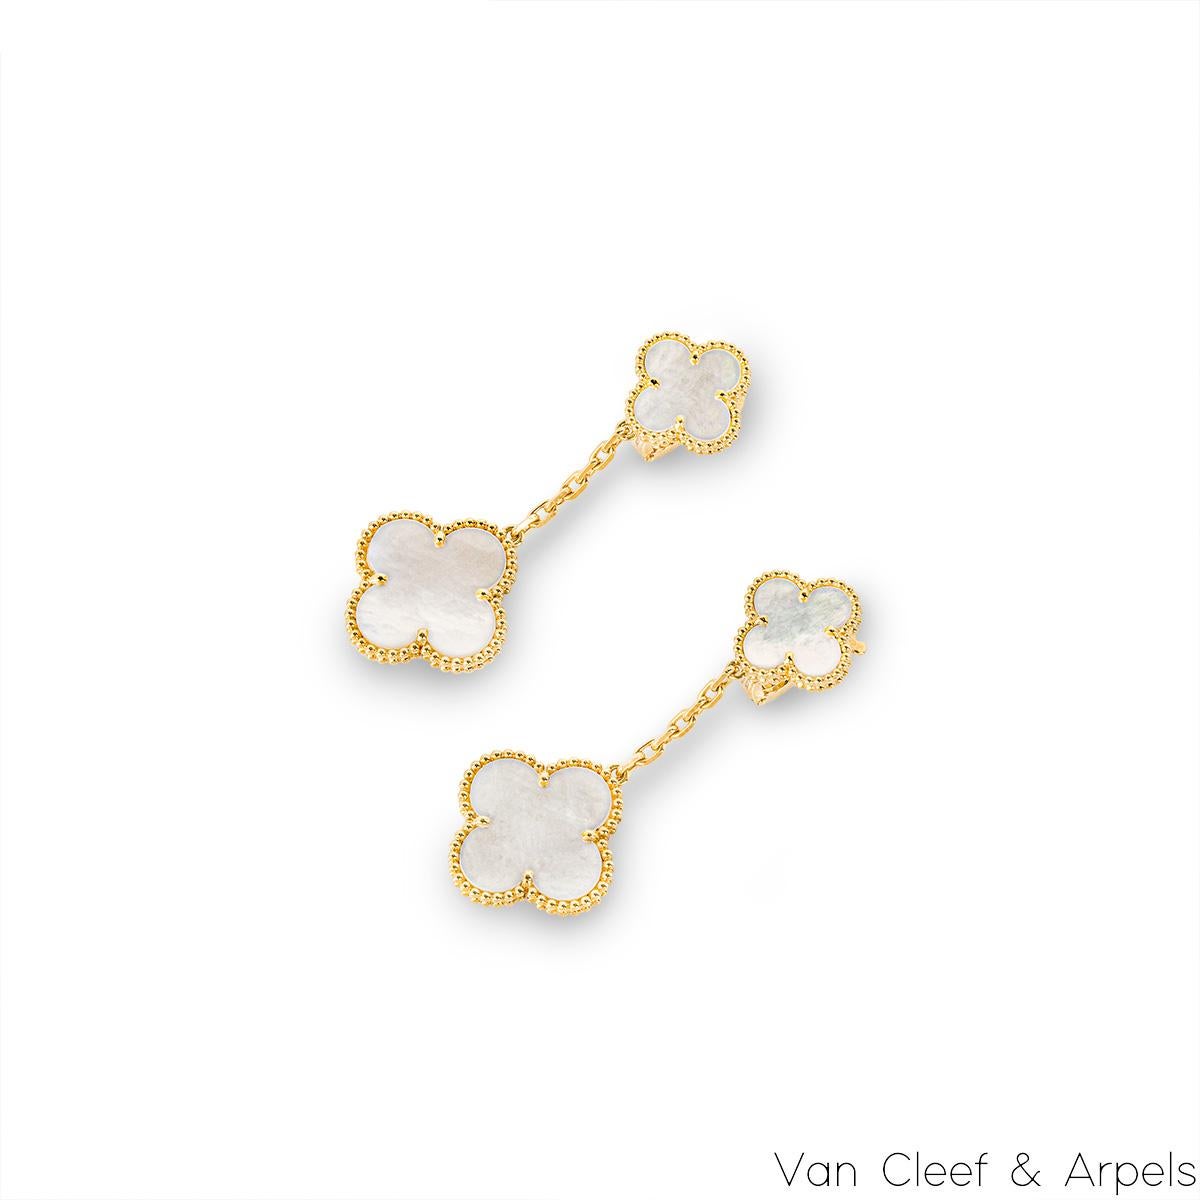 A gorgeous pair of 18k yellow gold mother of pearl earrings by Van Cleef & Arpels from the Magic Alhambra collection. The earrings comprise of two graduating 4-leaf clover motifs with a mother of pearl inlay, complemented by a beaded edge and